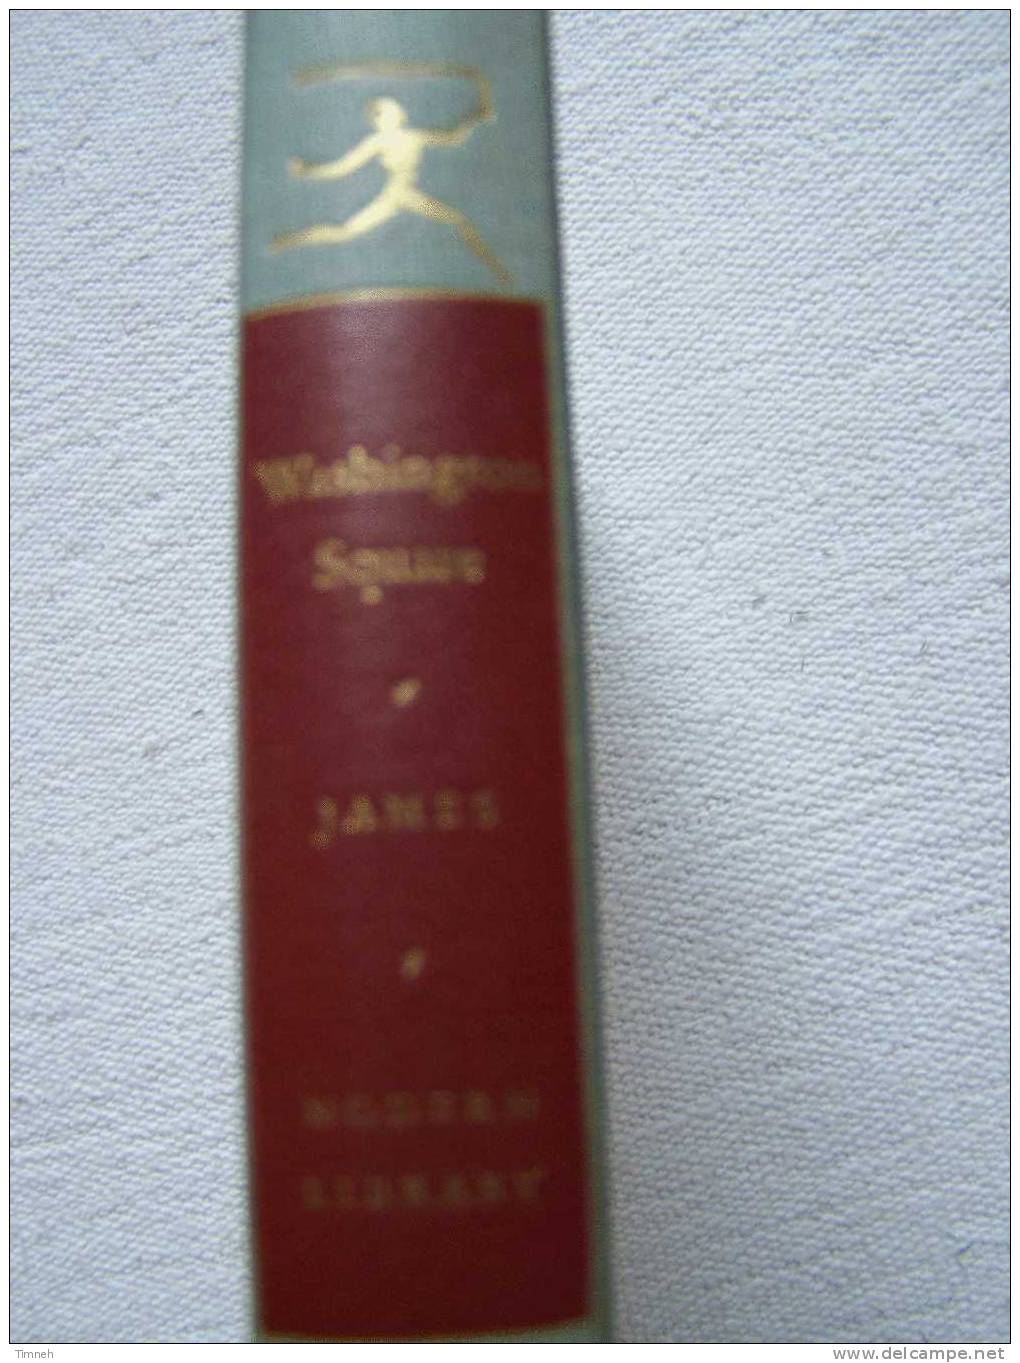 HENRY JAMES-Washington Square-the Modern Library-introduction Clifton Fadiman - Famille/ Relations